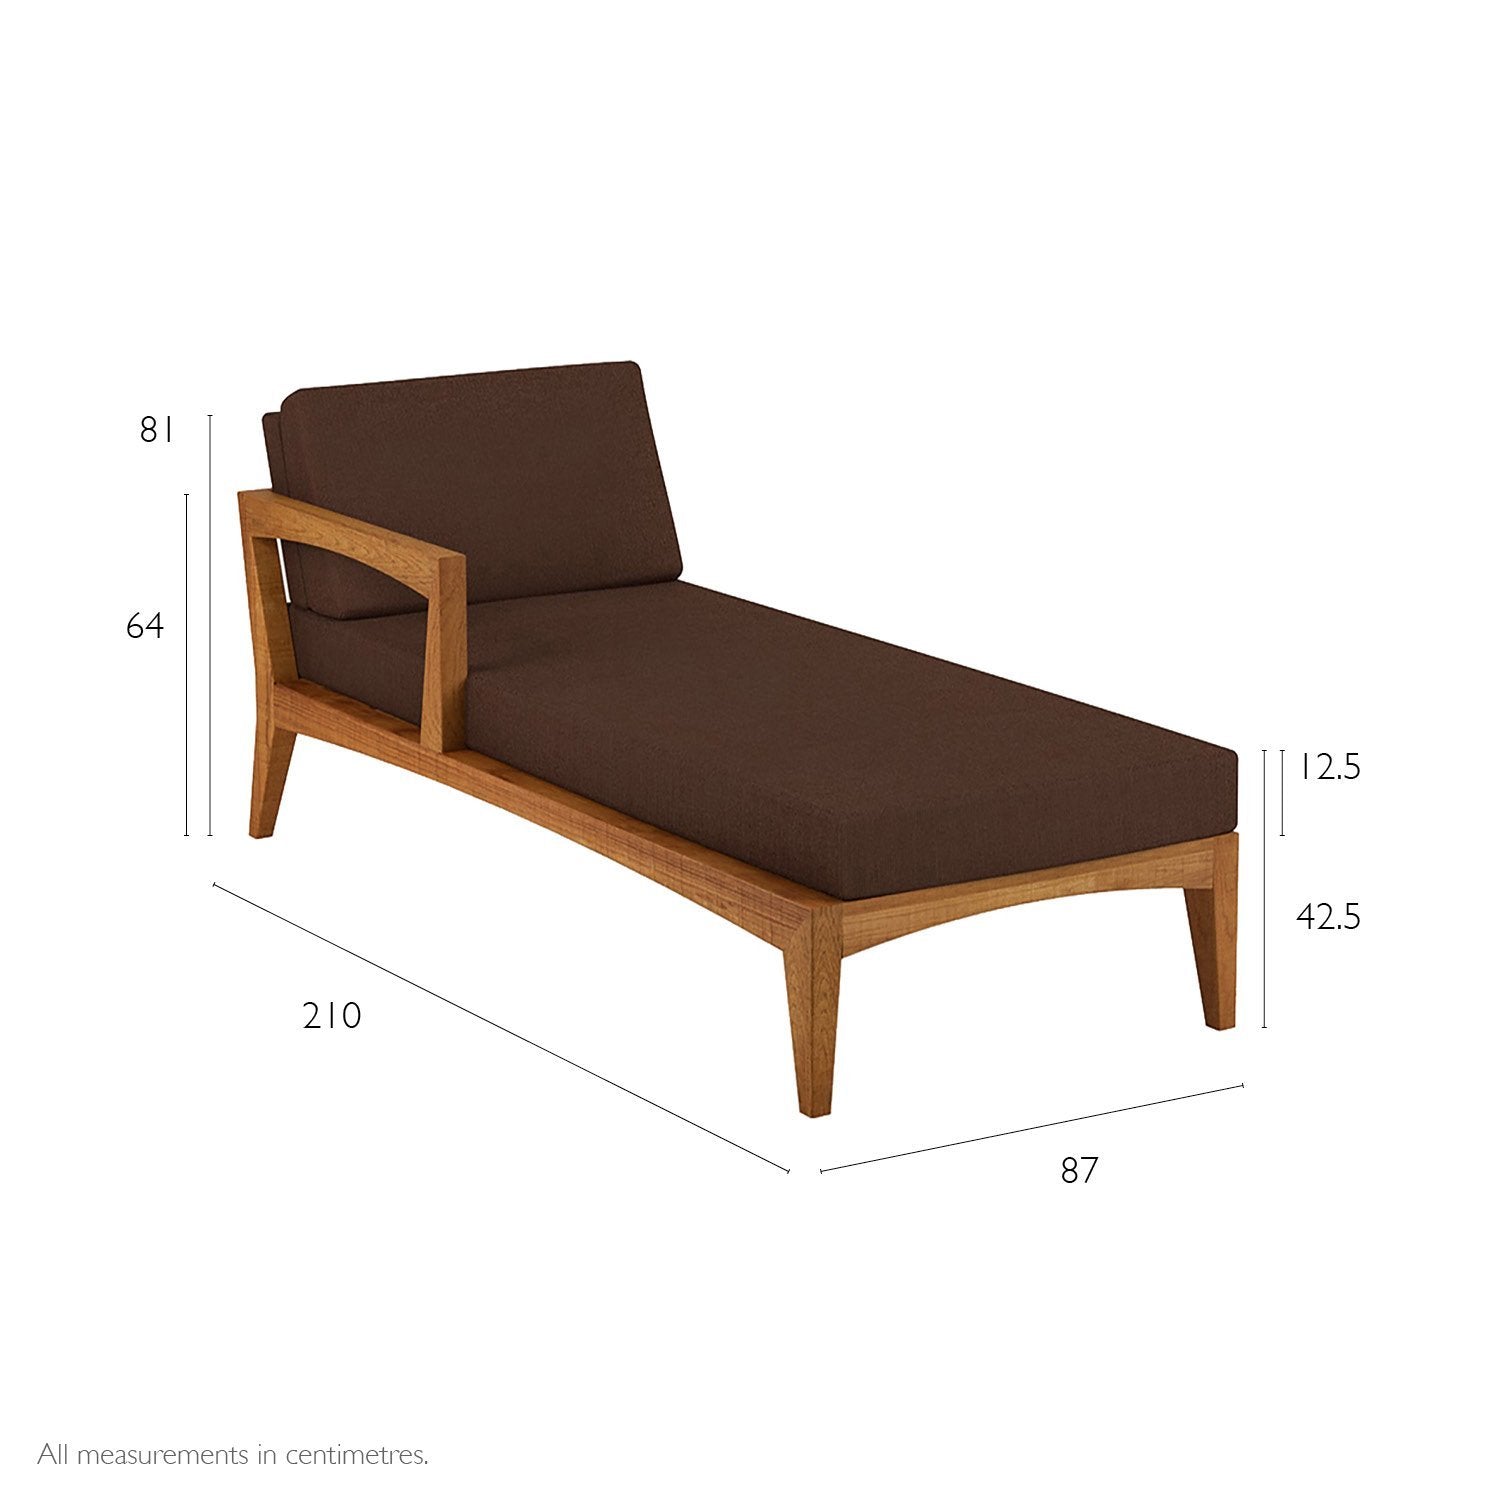 Zenhit right arm daybed with dimensions